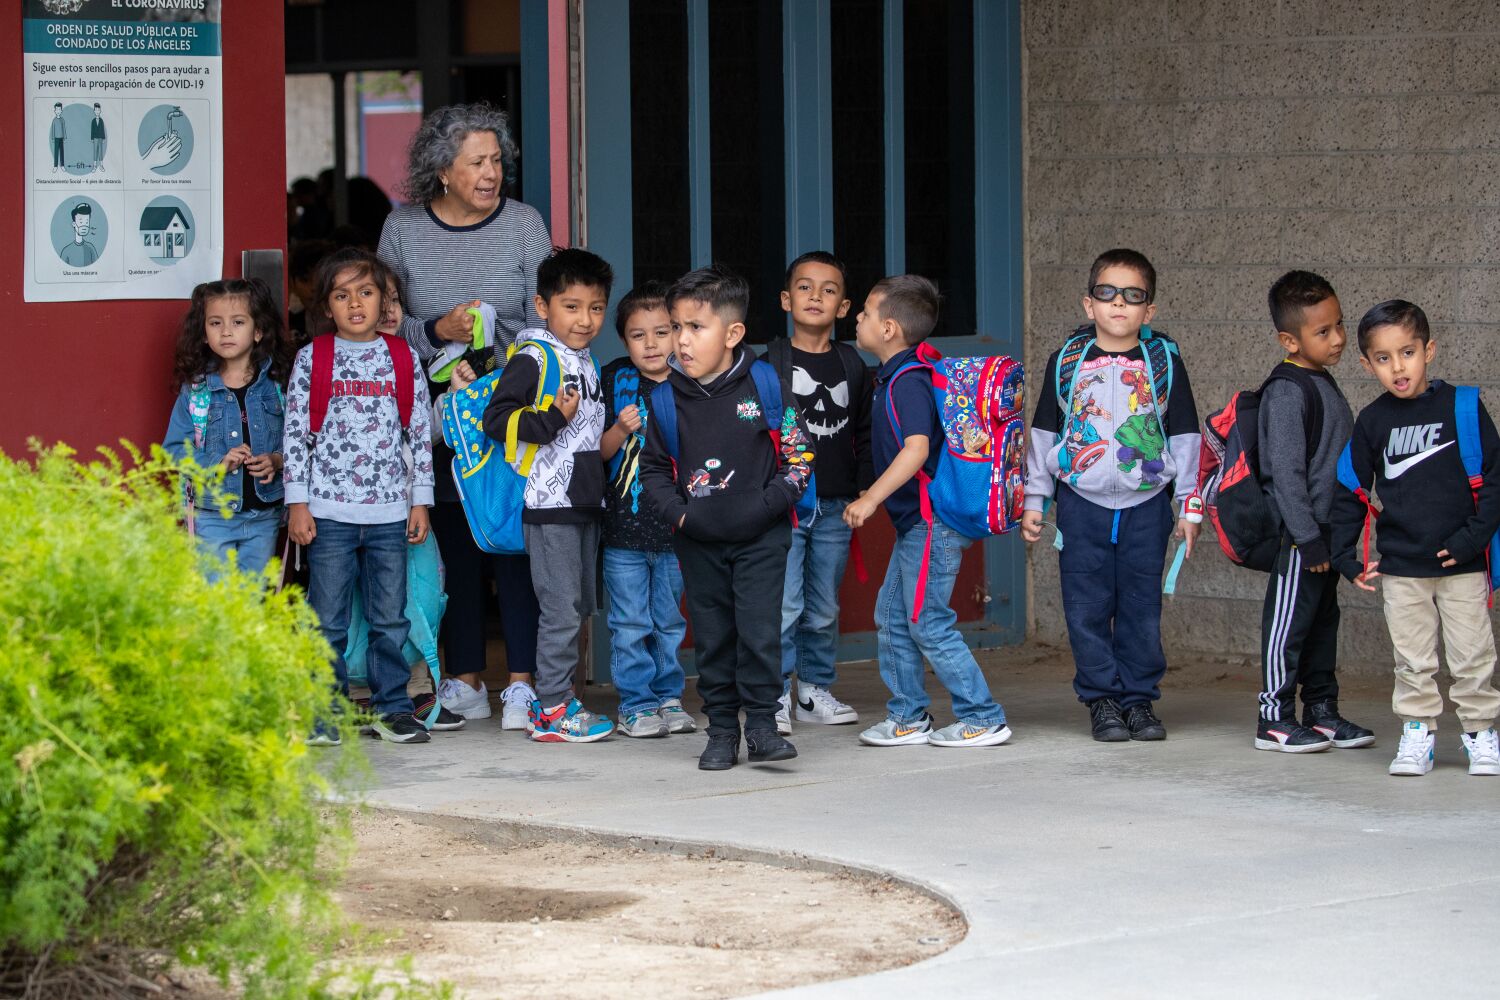 Nervous about the first day of school? Get your little one ready with these tips